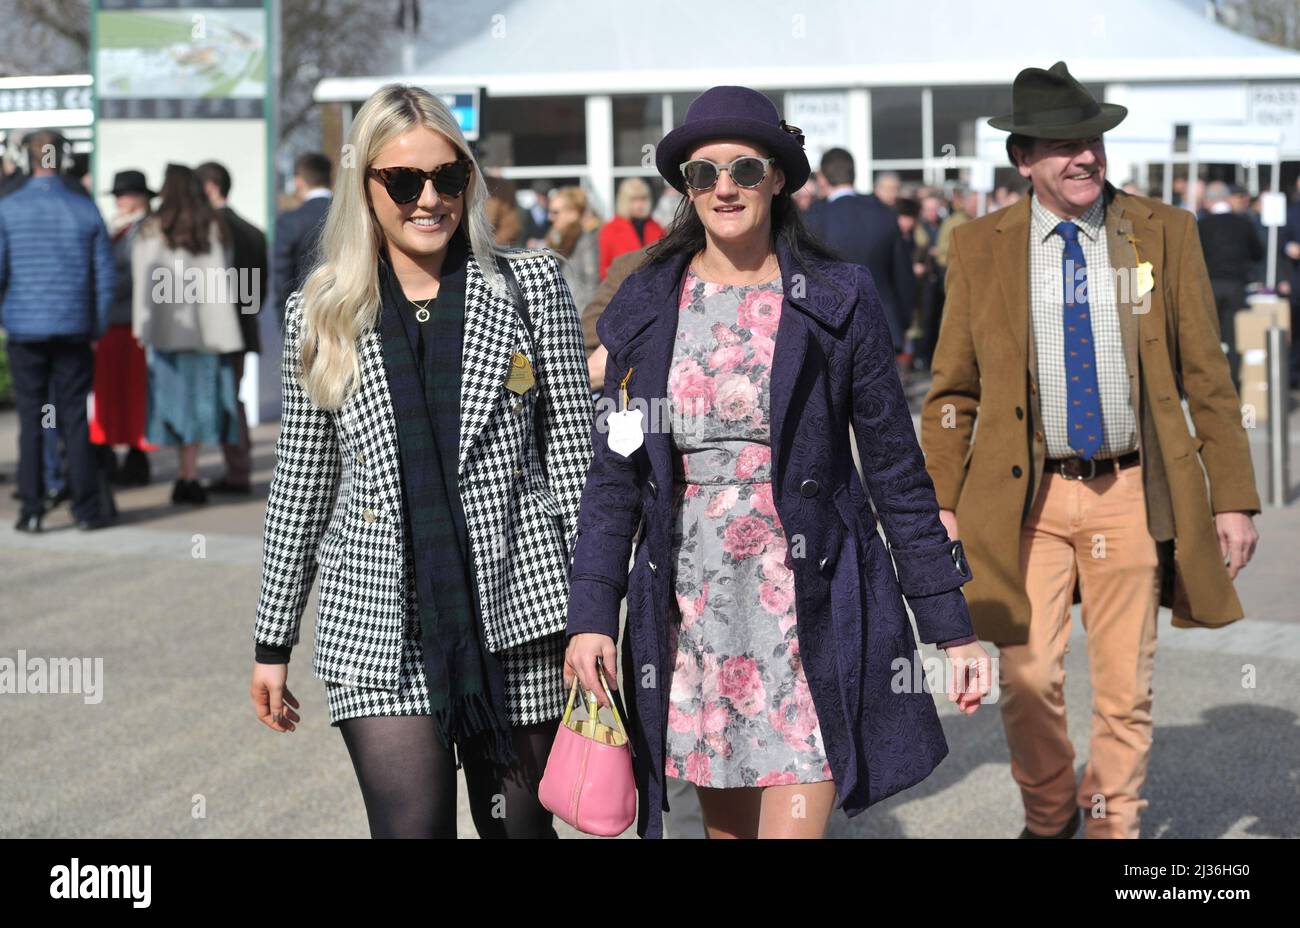 Day Four, Gold Cup Day at Cheltenham Racecourse Gold Cup Festival   Crowds    Pictures by Mikal Ludlow Photography  Tel; 07855177205  18-3-22 Stock Photo